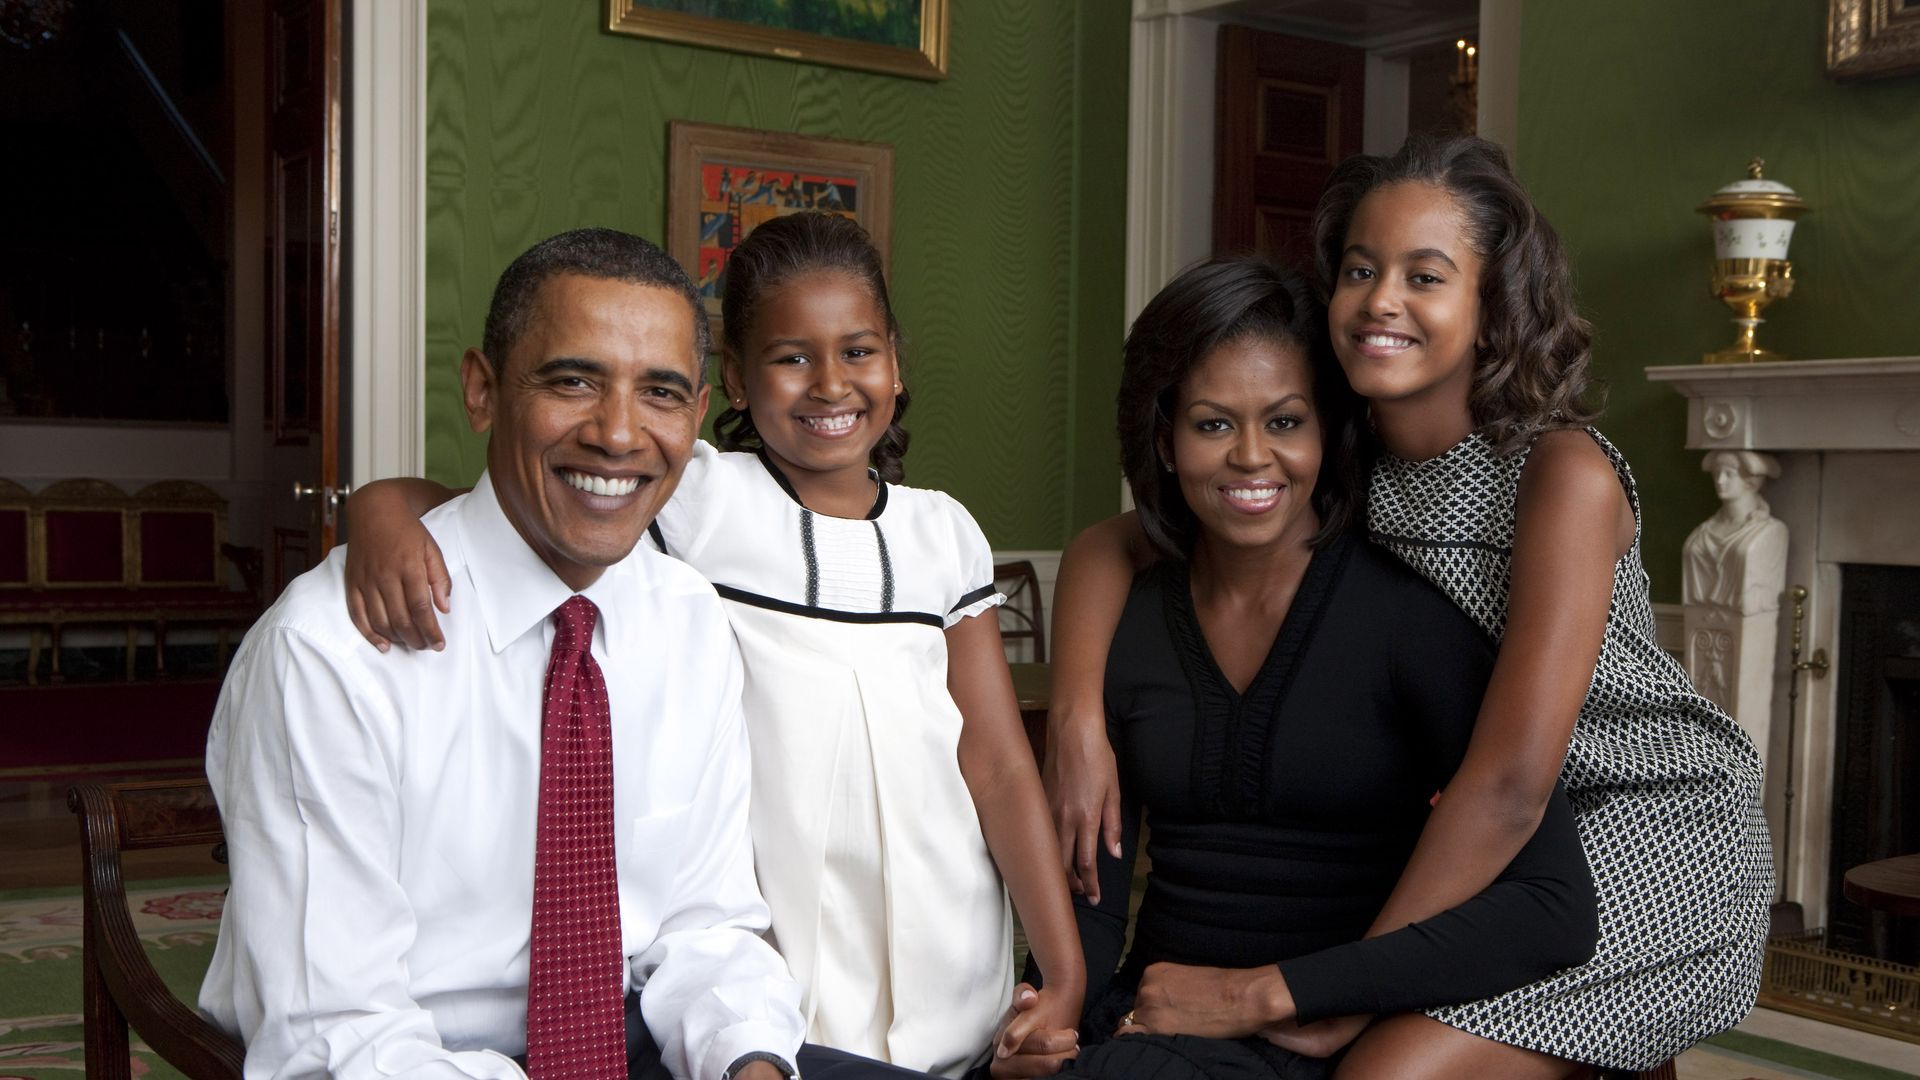 U.S. President Barack Obama, daughter Malia Obama, first lady Michelle Obama and daughter Sasha Obama sit for portrait in the Green Room of the White House